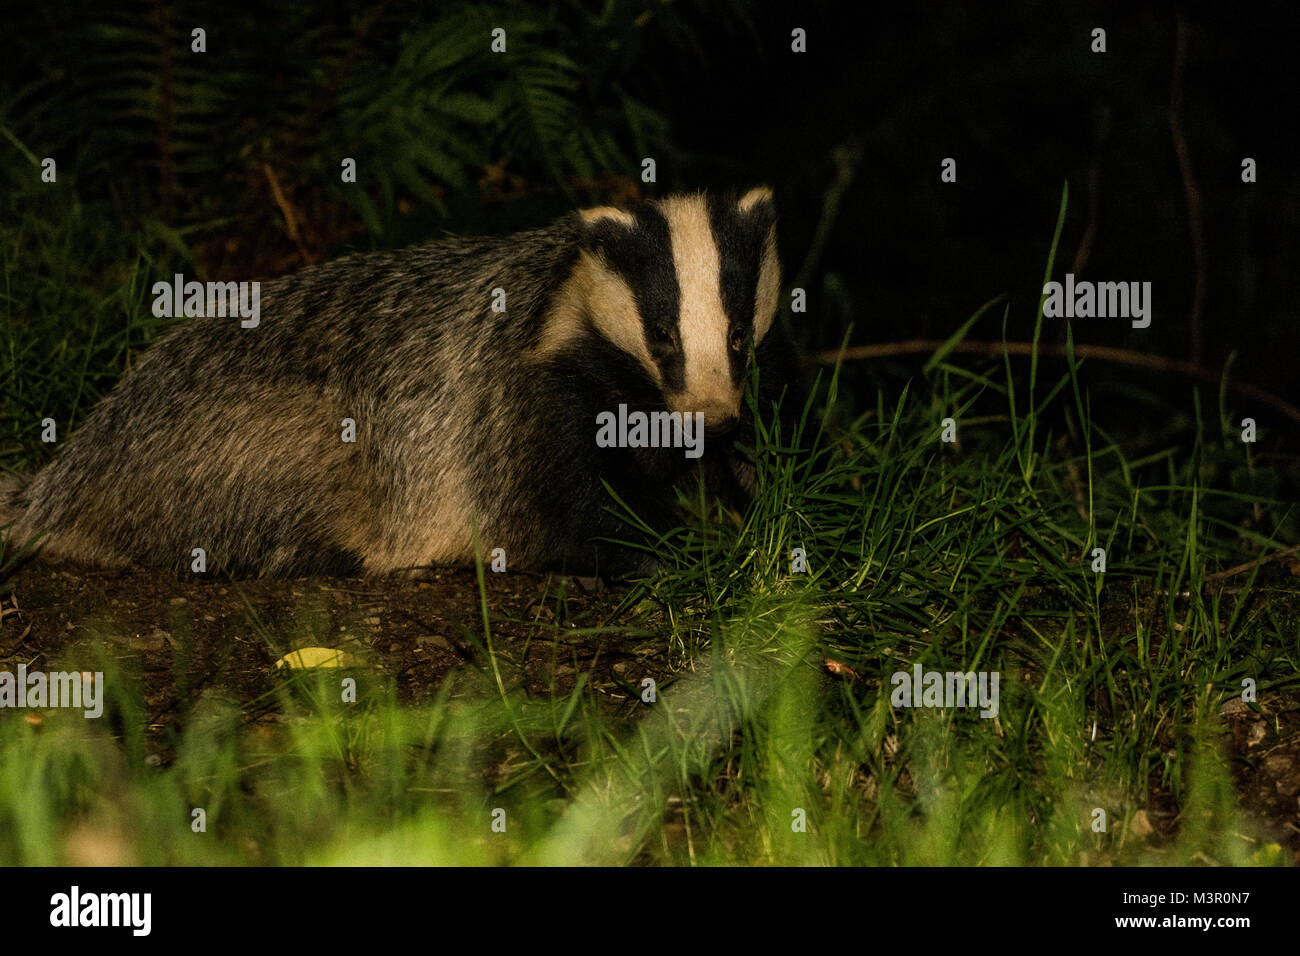 Wild badger searching in woods Stock Photo